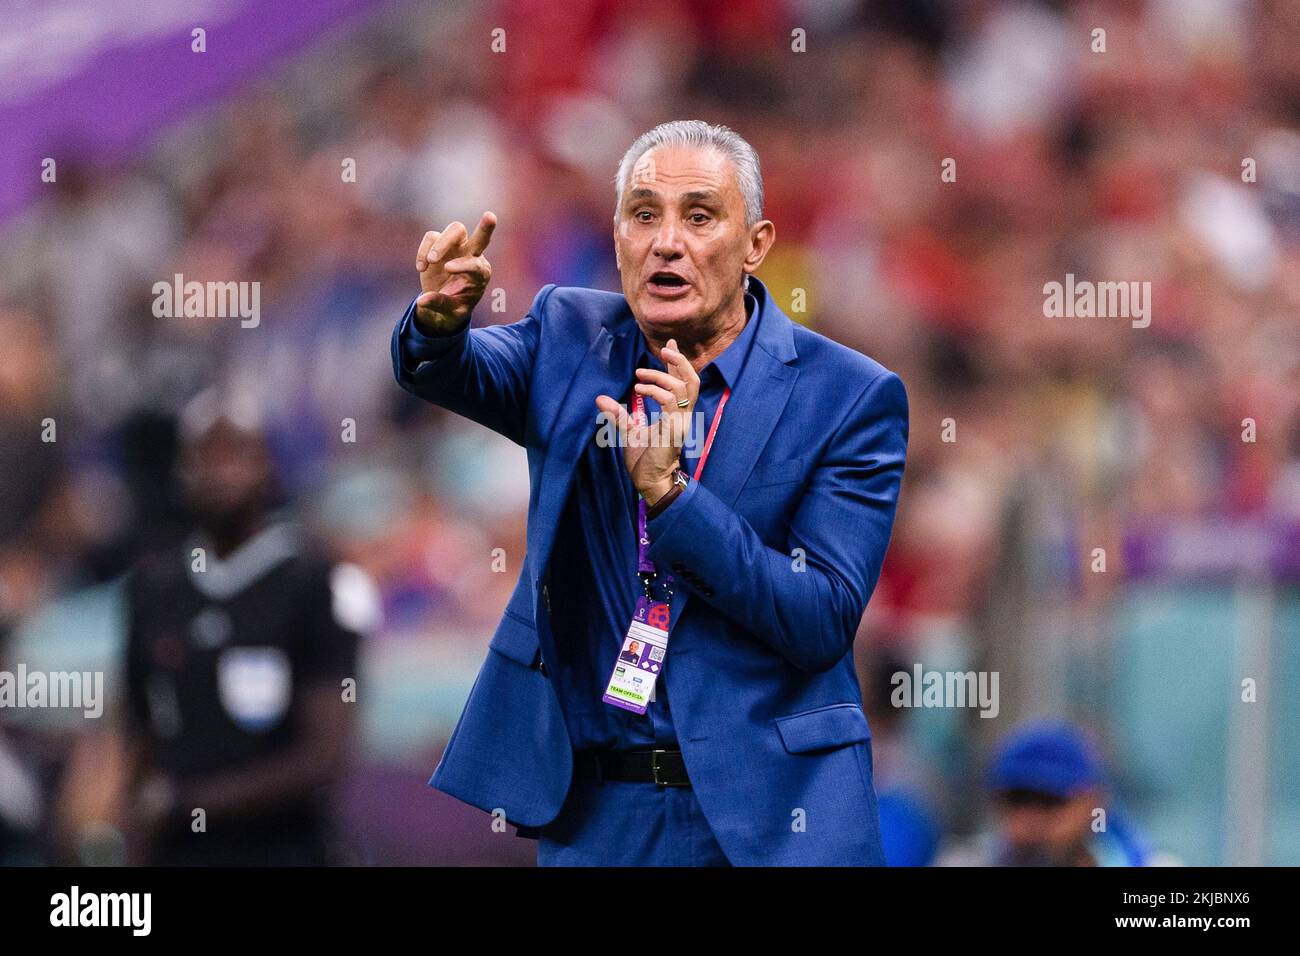 Lusail, Qatar. 24th Nov, 2022. Lusail, Qatar, Nov 25th 2022: Head coach of Brazil, Tite before the match between Brazil vs Serbia, valid for the group stage of the World Cup, held at the Lusail National Stadium in Lusail, Qatar. (Marcio Machado/SPP) Credit: SPP Sport Press Photo. /Alamy Live News Stock Photo